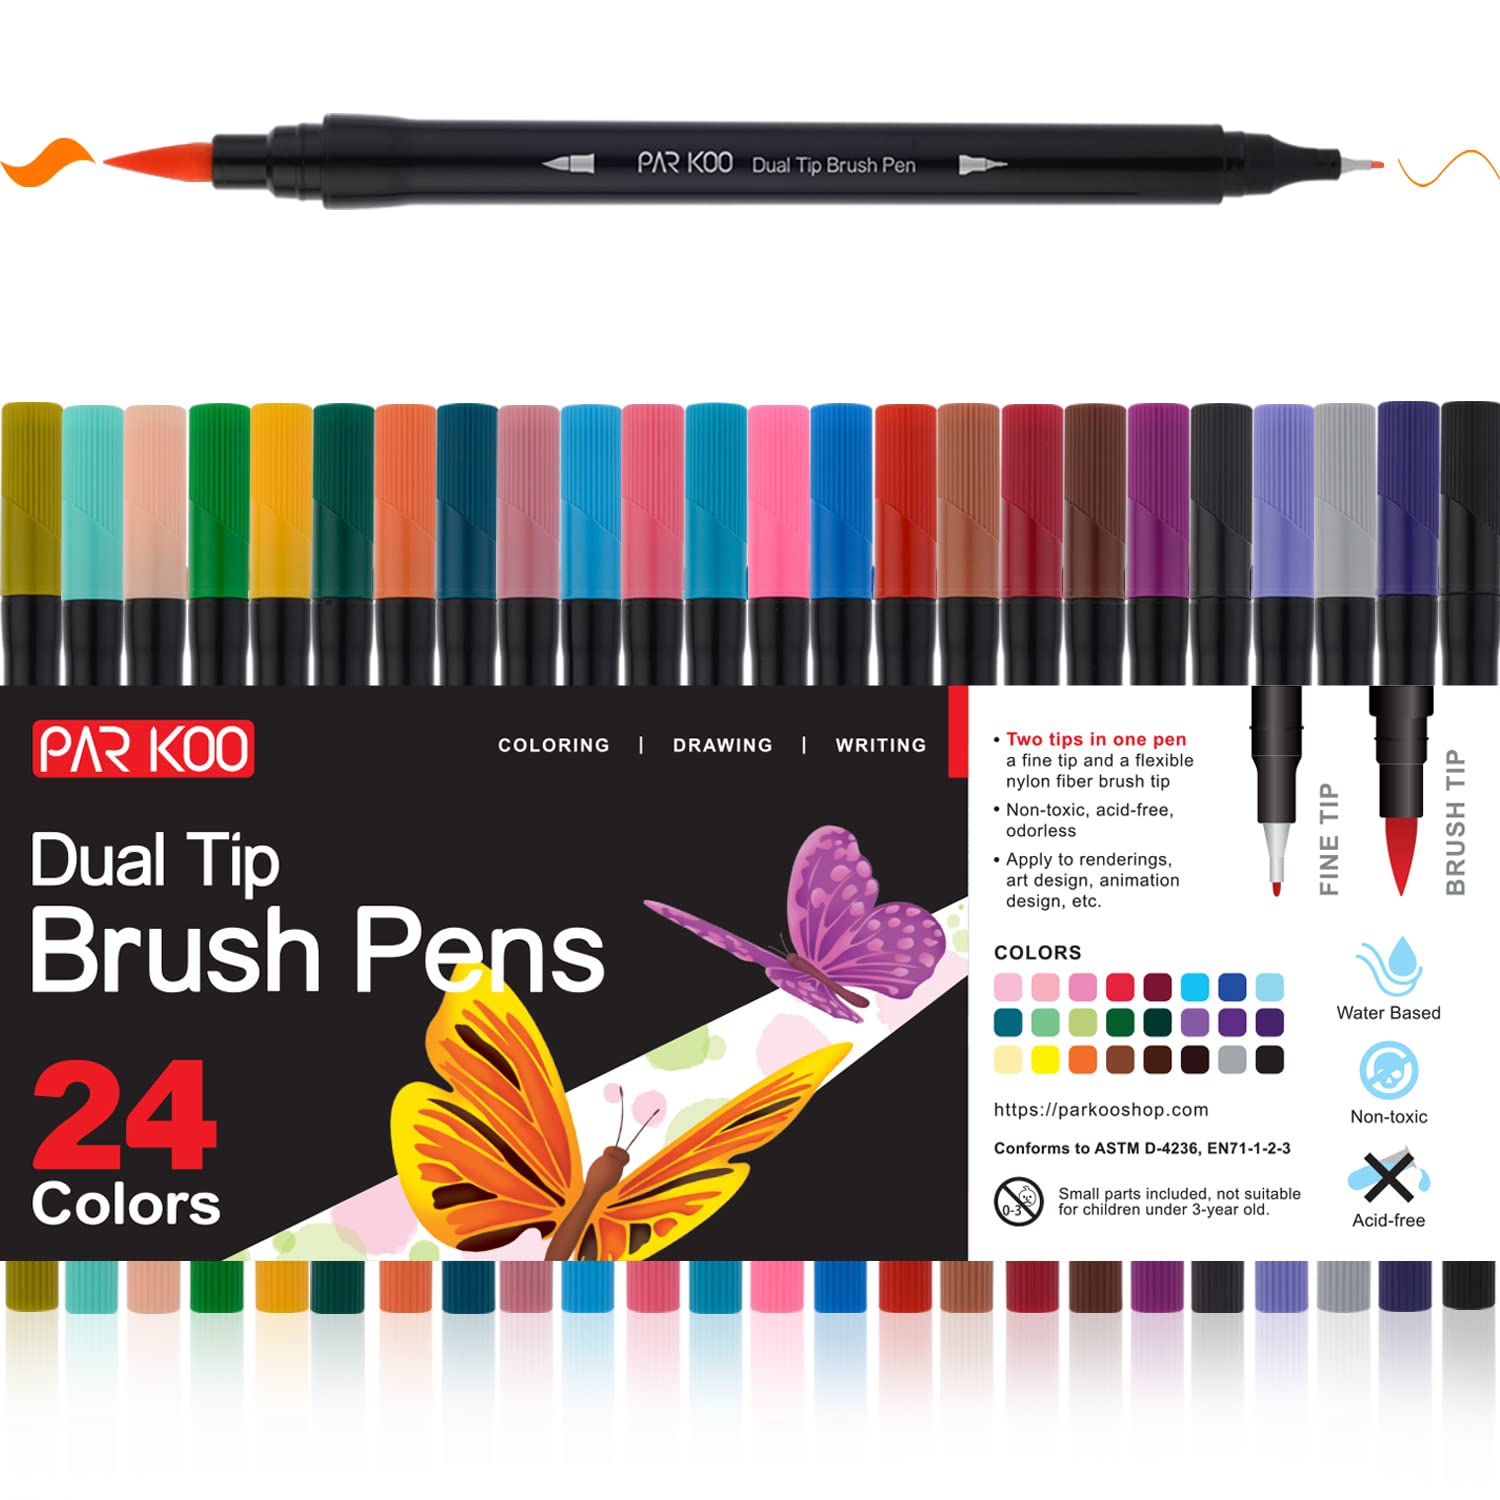 Colorful Creations: 24 Dual Brush Art Markers for Adult Coloring Books, Fine Tip Artist Colored Marker Set for Journaling, Planning, and Note Taking